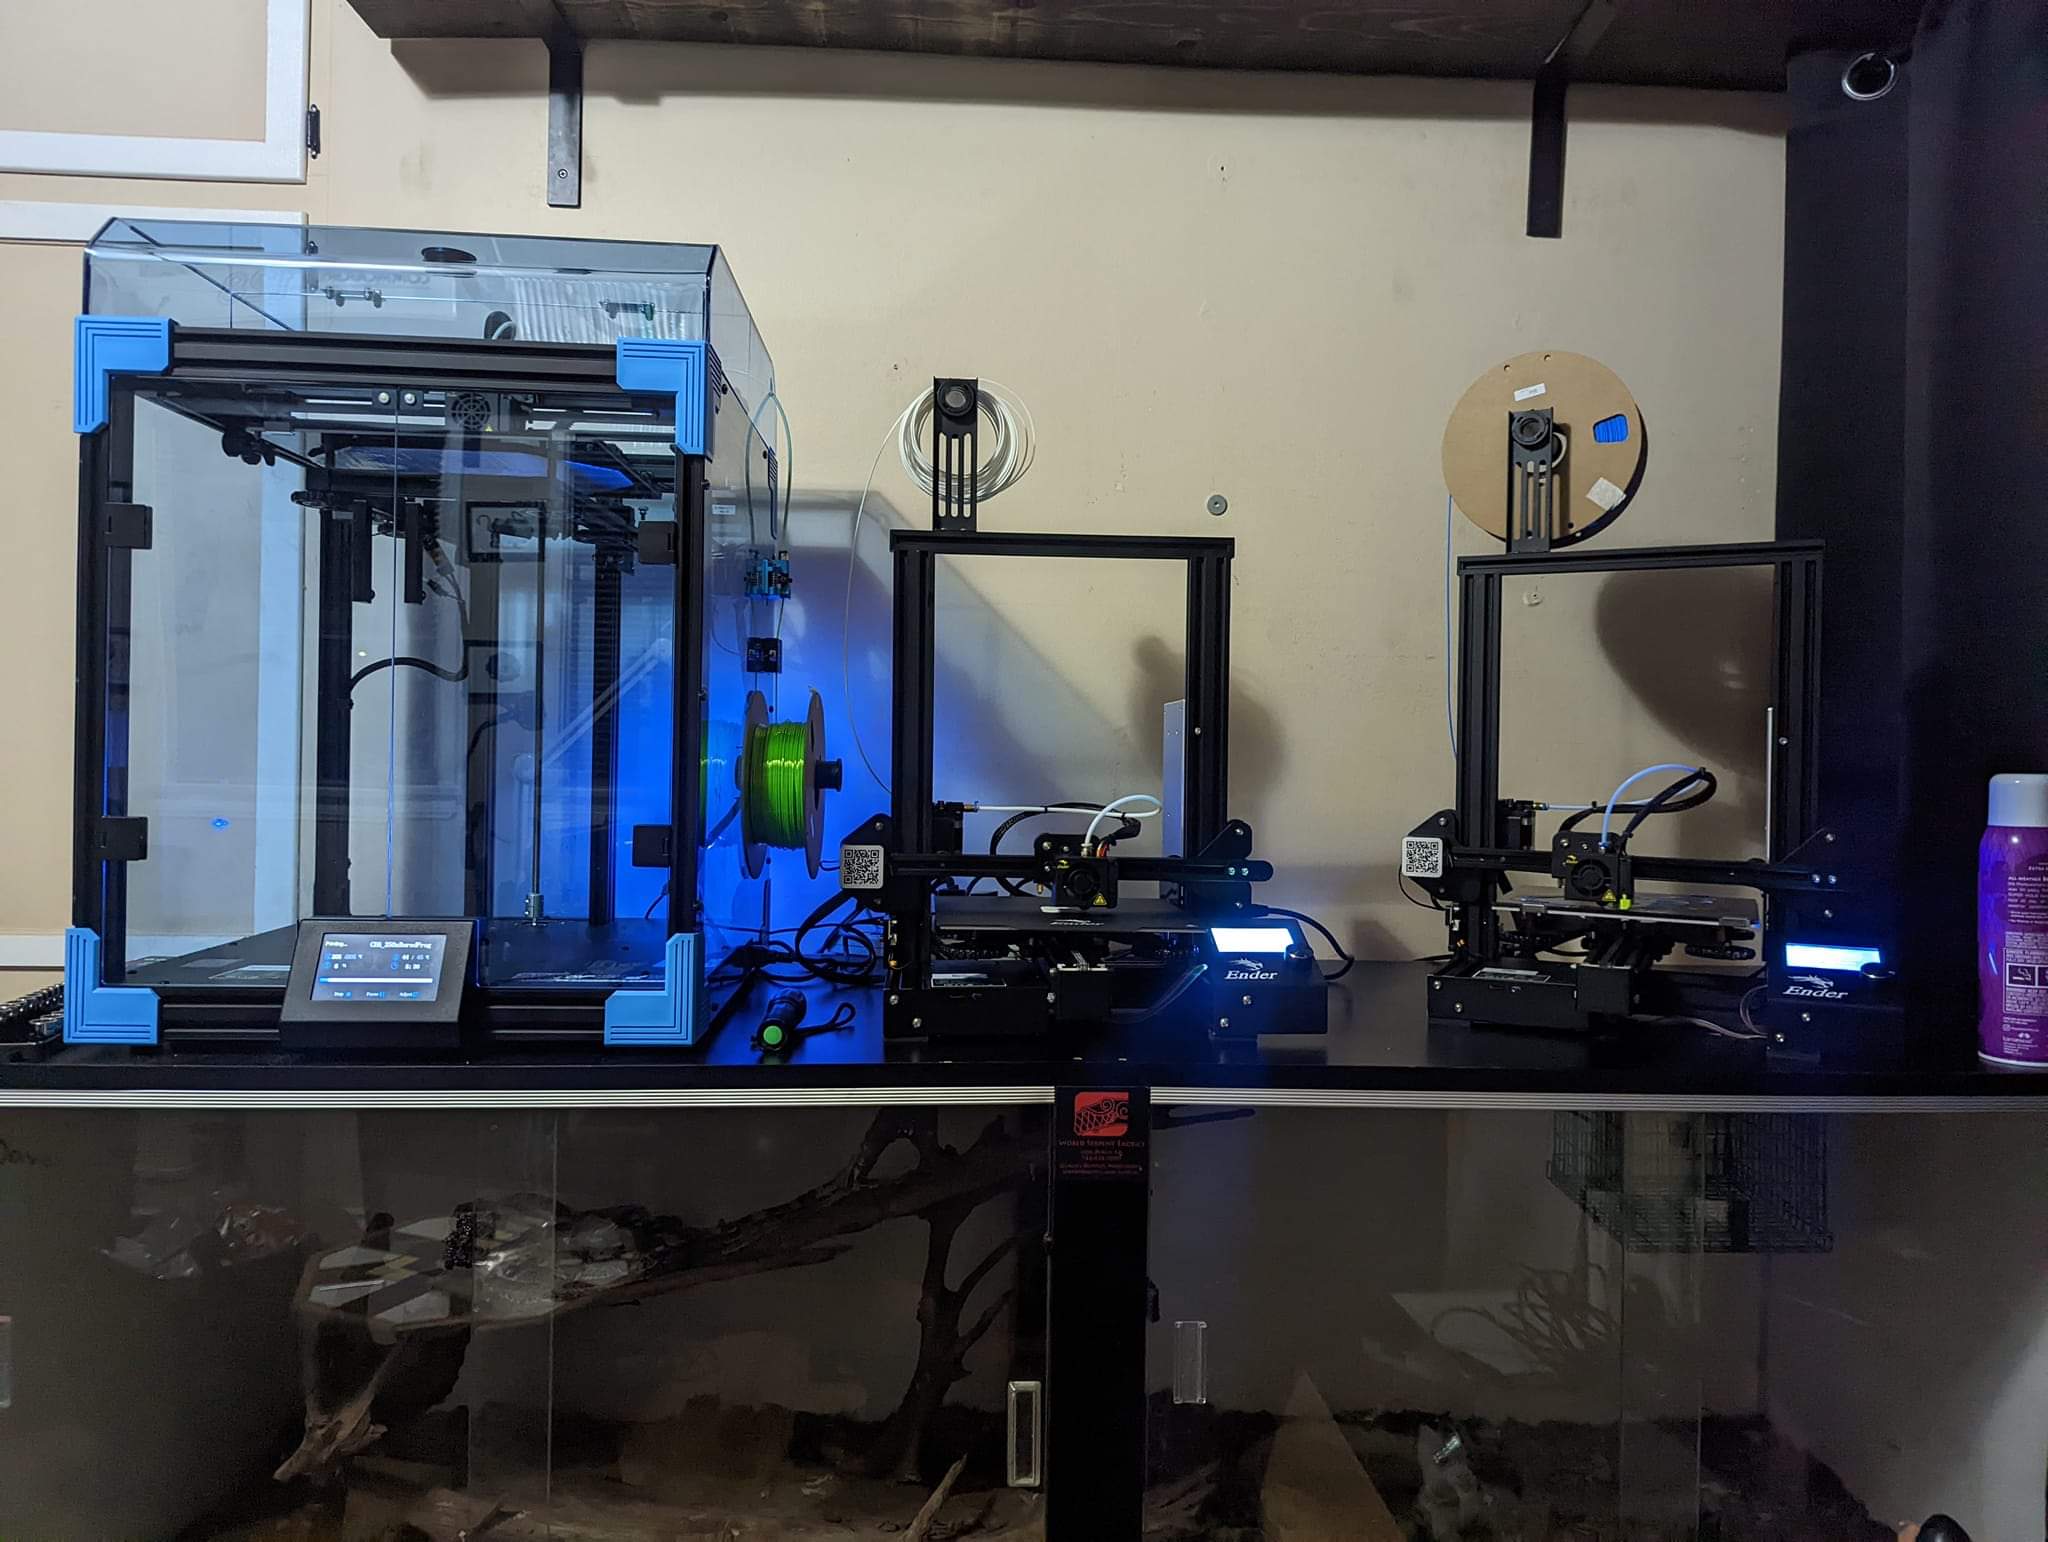 My foray into 3D printing: Creality Ender 6 and Ender 3 Pro experiences and review.